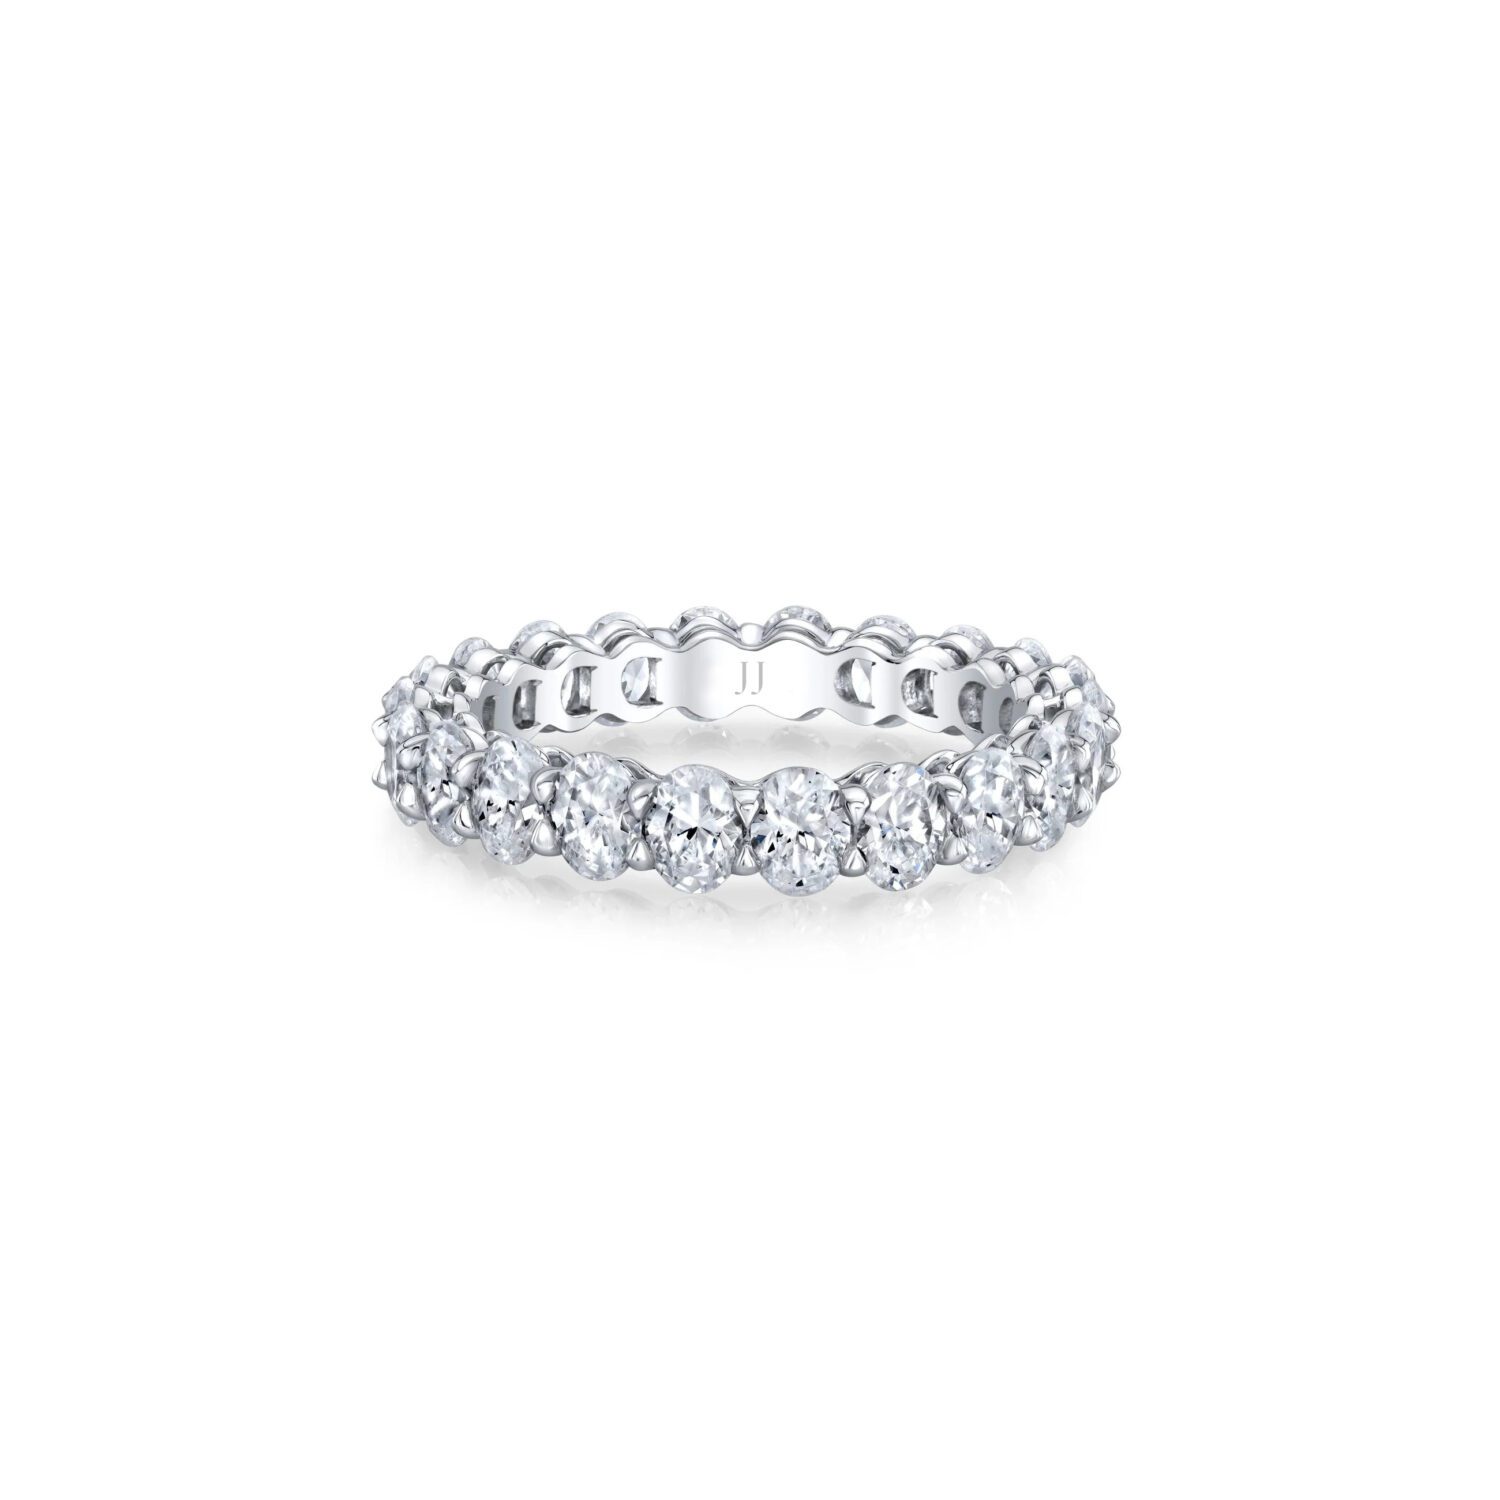 Lab grown diamonds in Cyprus - The Royal Oval Cut 2.11 ct to 12 ct Full Eternity Band Diamond Ring best quality and price